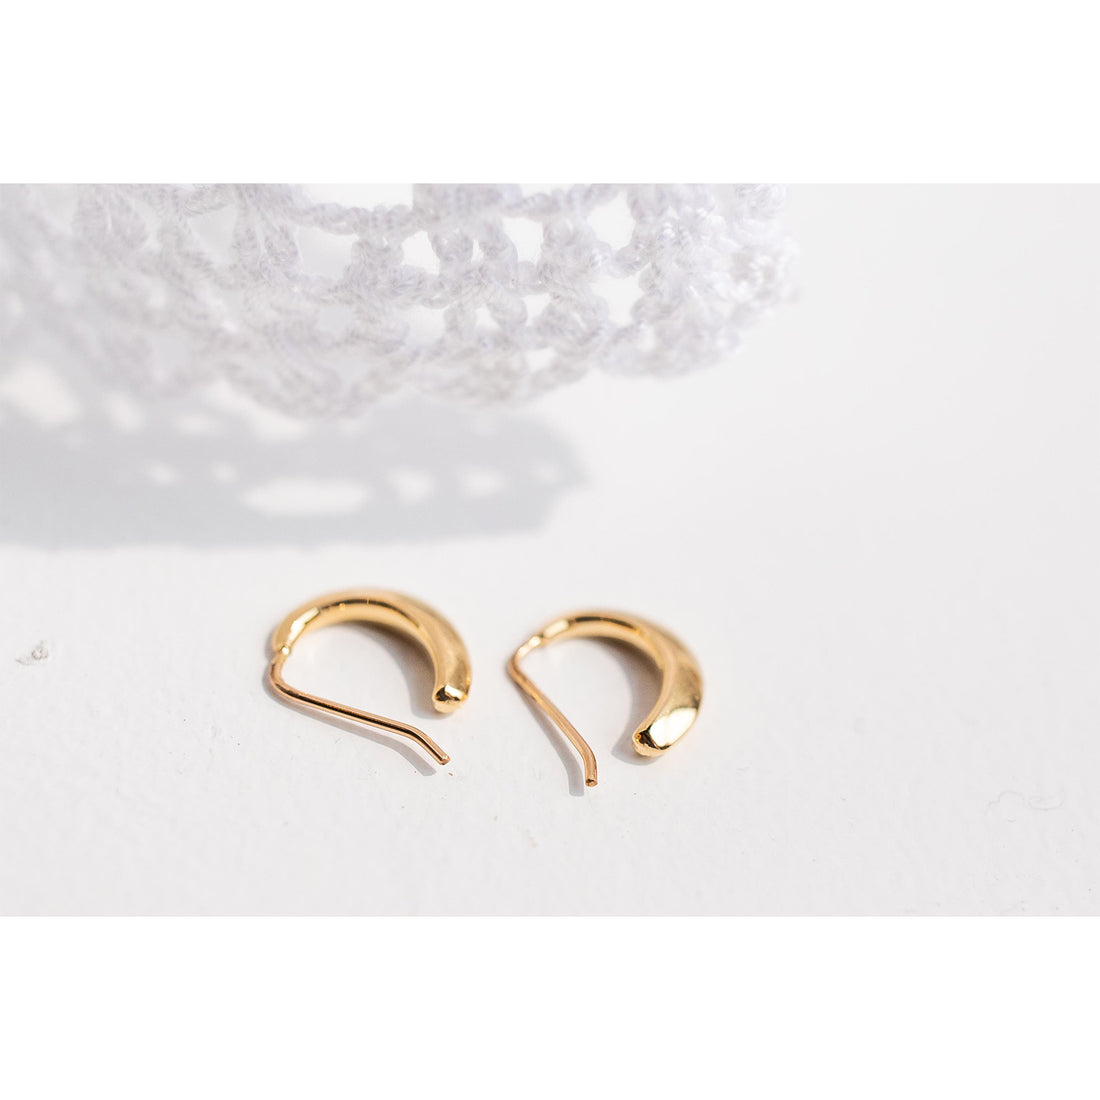 Fay Andrada Selka Petite Hoops in Gold Plated Brass